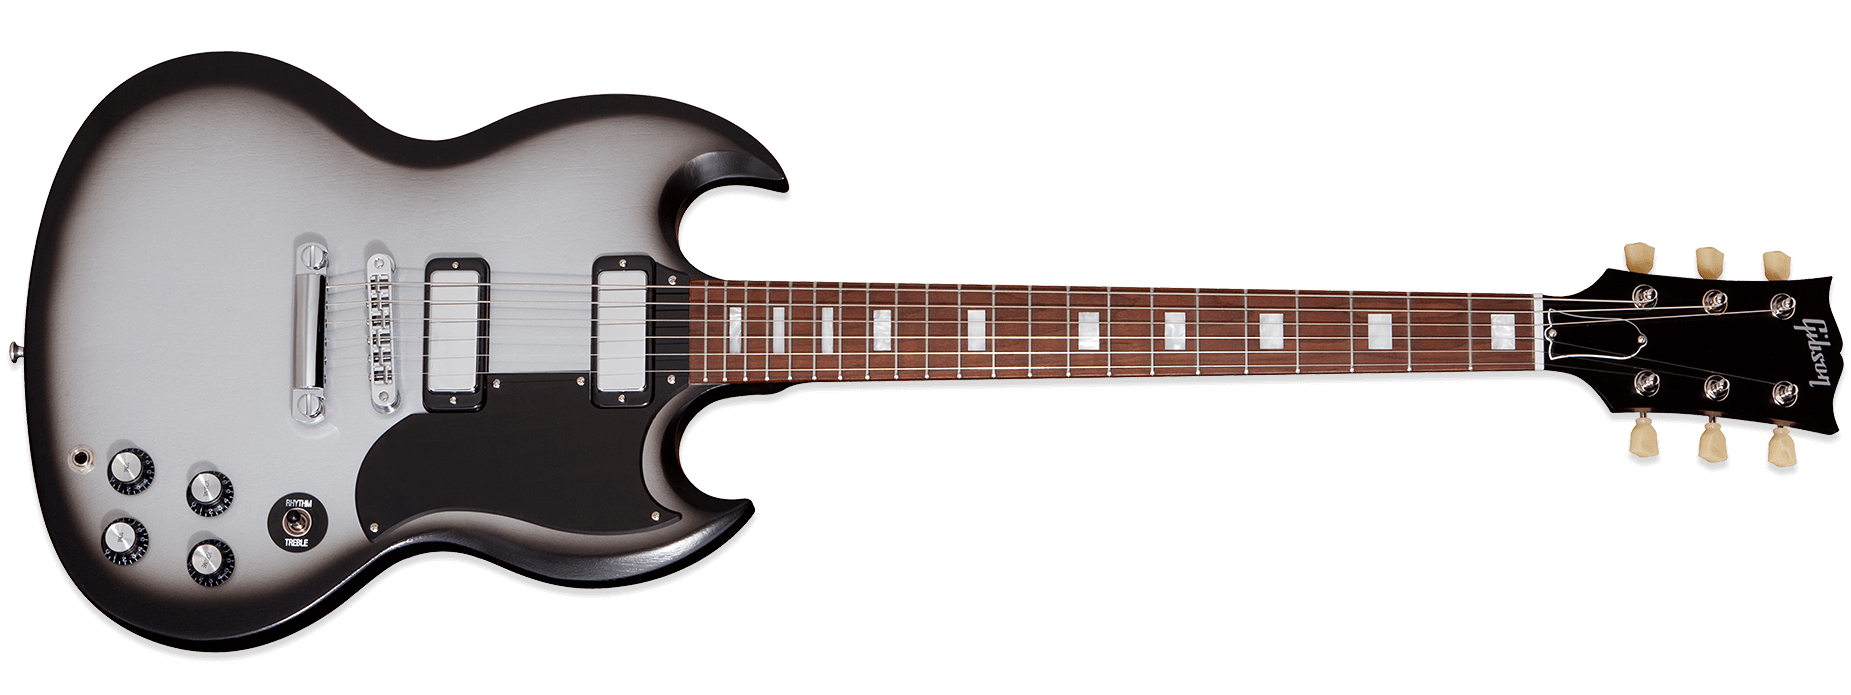 Gibson SG Special 70s Tribute Satin Silver Burst